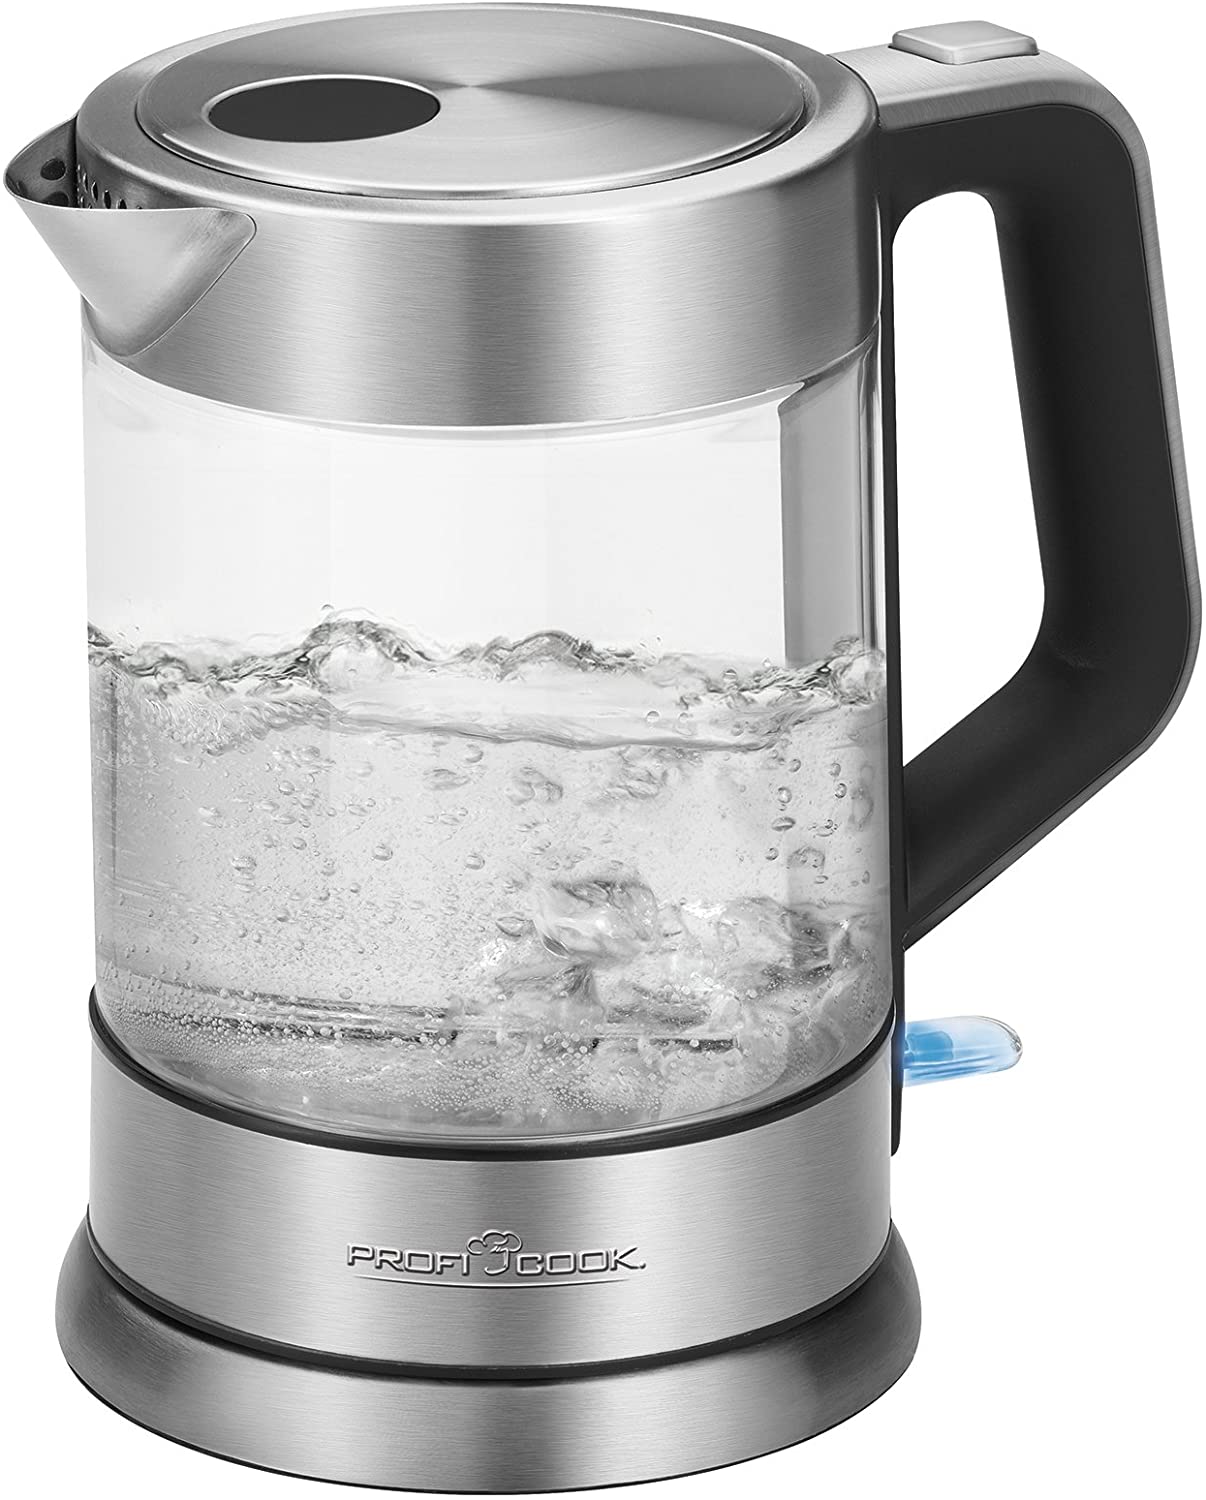 Profi Cook PC-WKS 1107 G Stainless Steel Glass Kettle, 1.5 L, 2200 W maximum, Stainless Steel Heating element, Steel, Stainless Steel